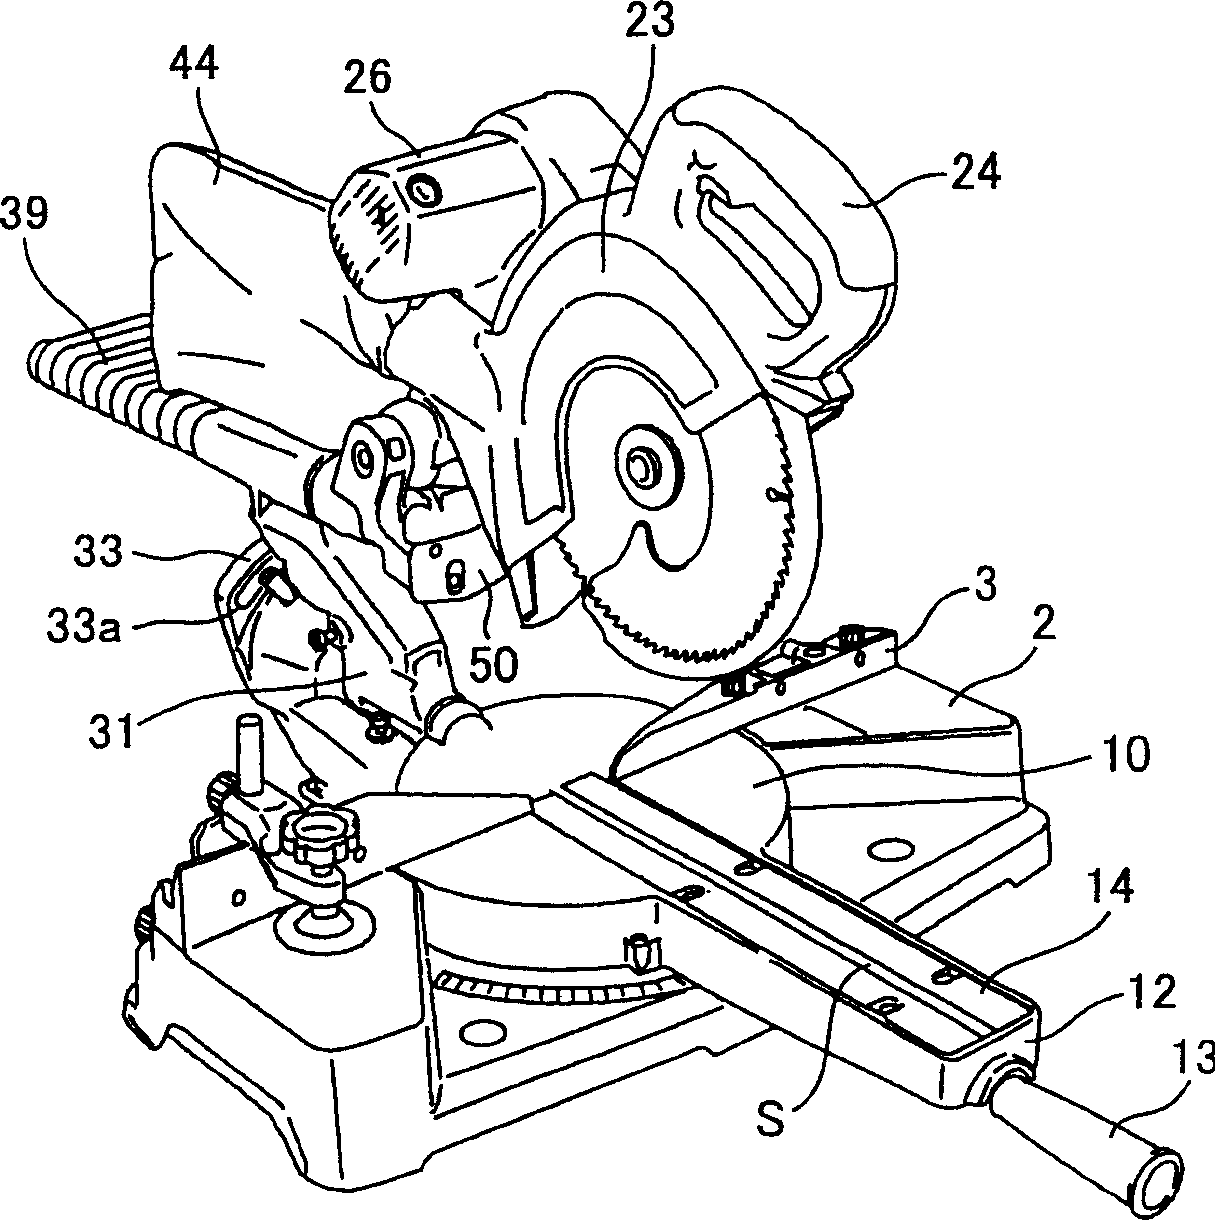 Inclined cutting saw with light projector